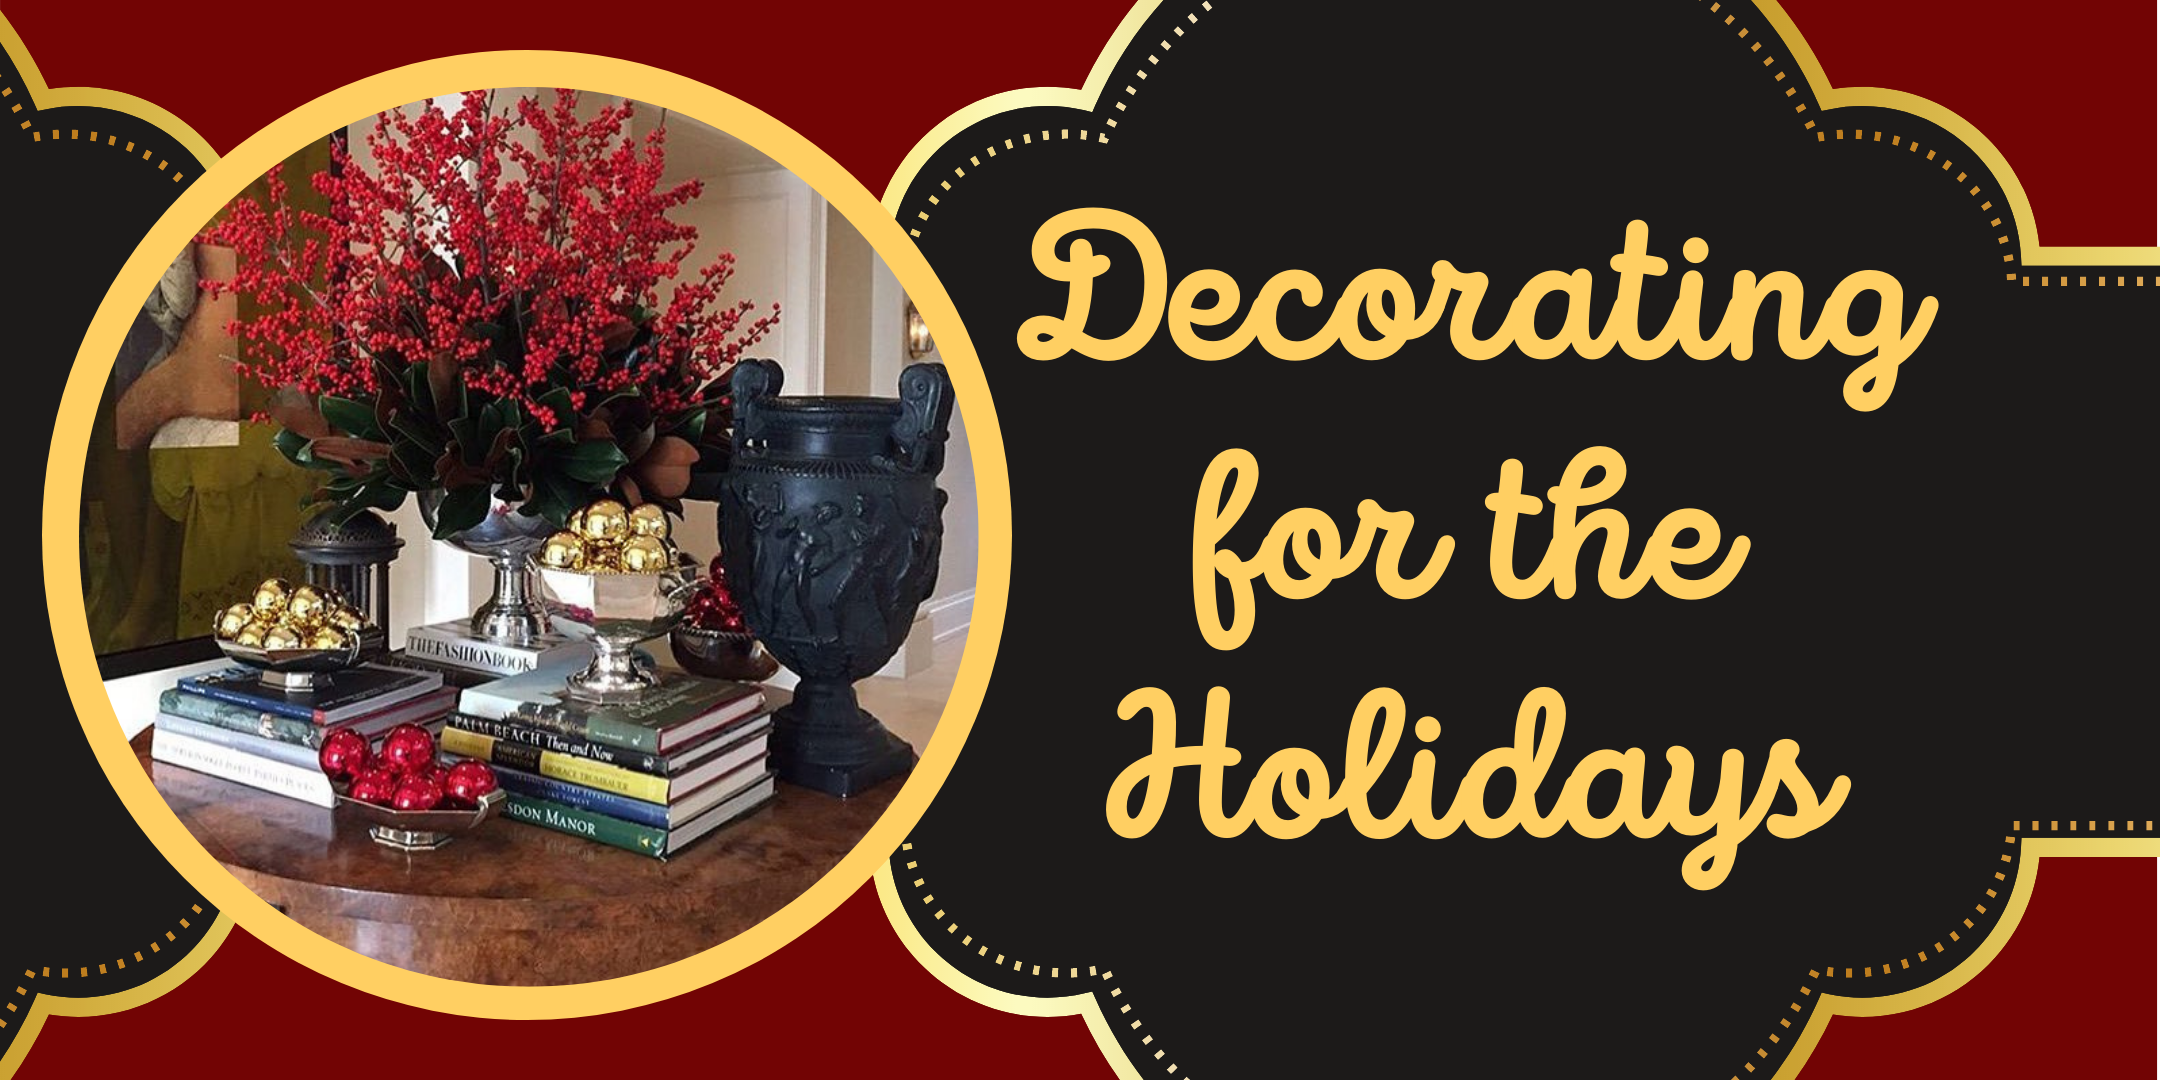 Decorating for the Holidays image